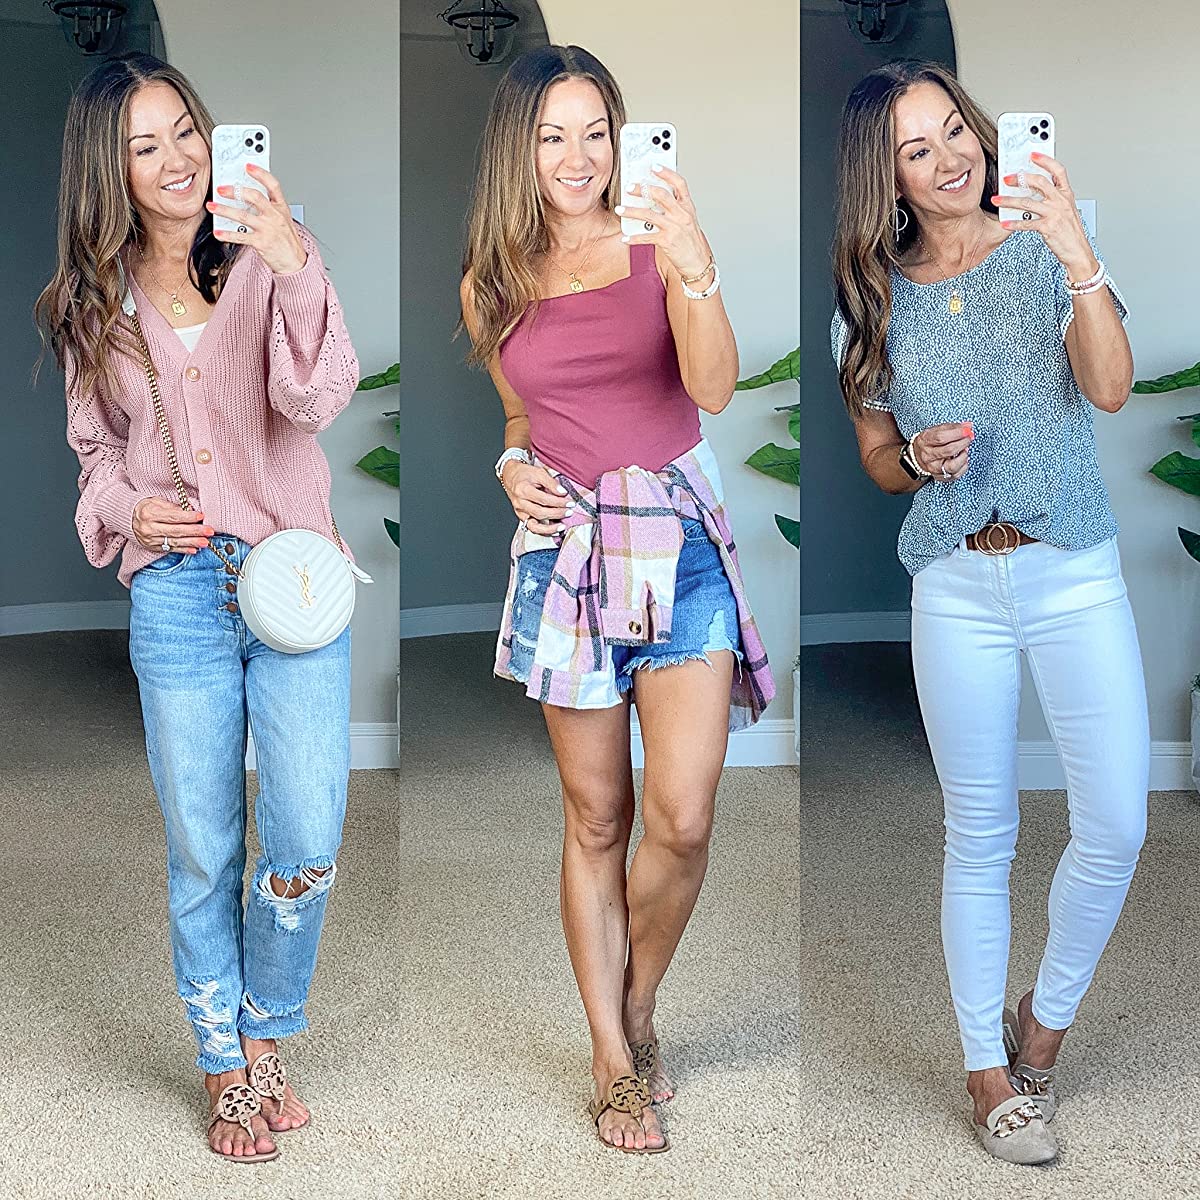 Amazon Fashion | Fall Transitional Pieces

#august #augusttopsellers #topsellers #amazon #amazonfinds #amazonfavorites #amazonbeauty #amazonfashion #amazonhome #blouse #whitejeans #shacket #cardigan #jeans #rippedjeans